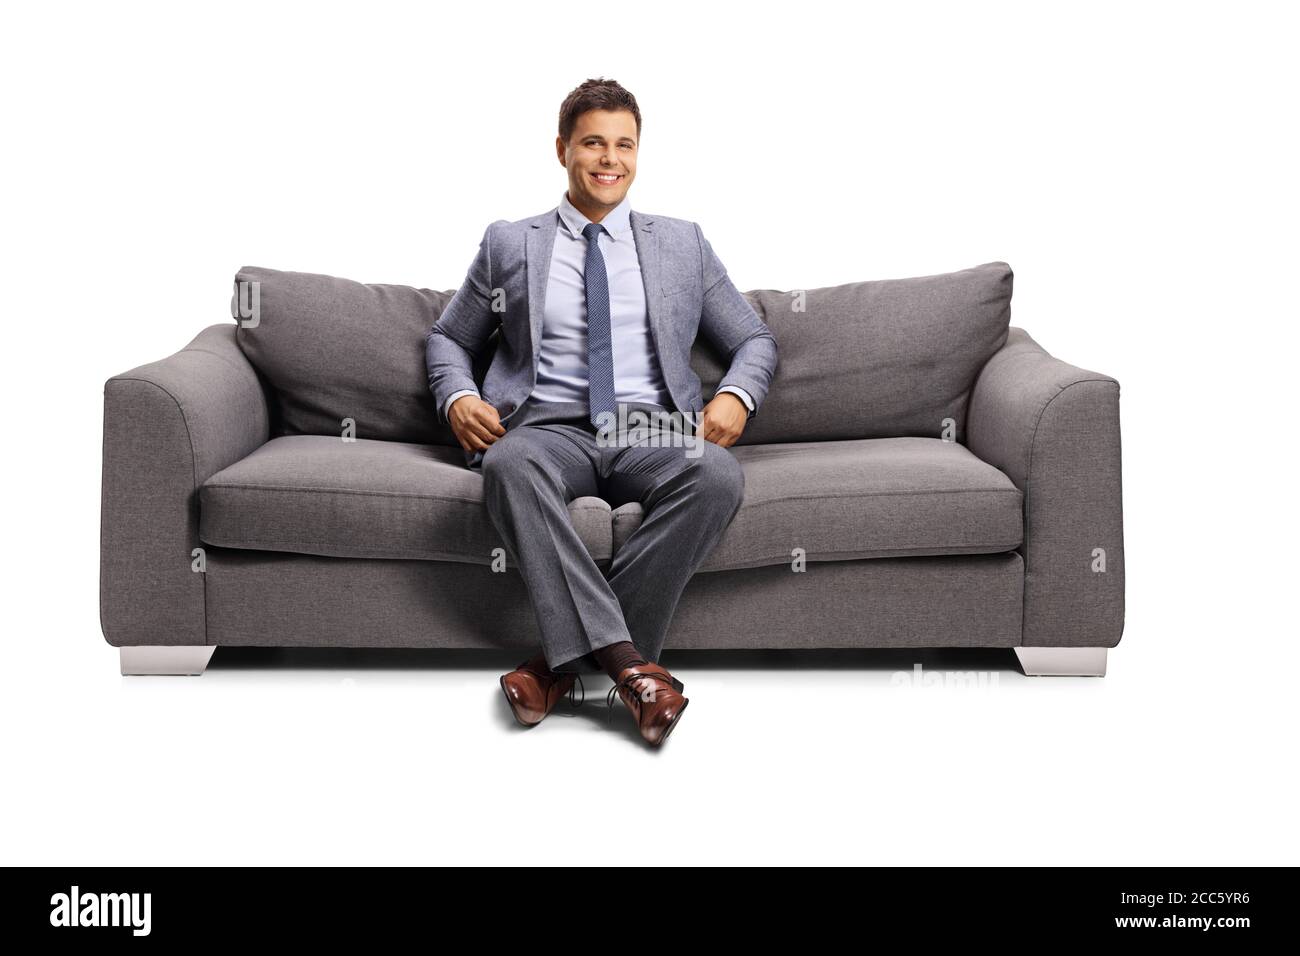 Man in elegant clothes sitting on a sofa and smiling isolated on white background Stock Photo